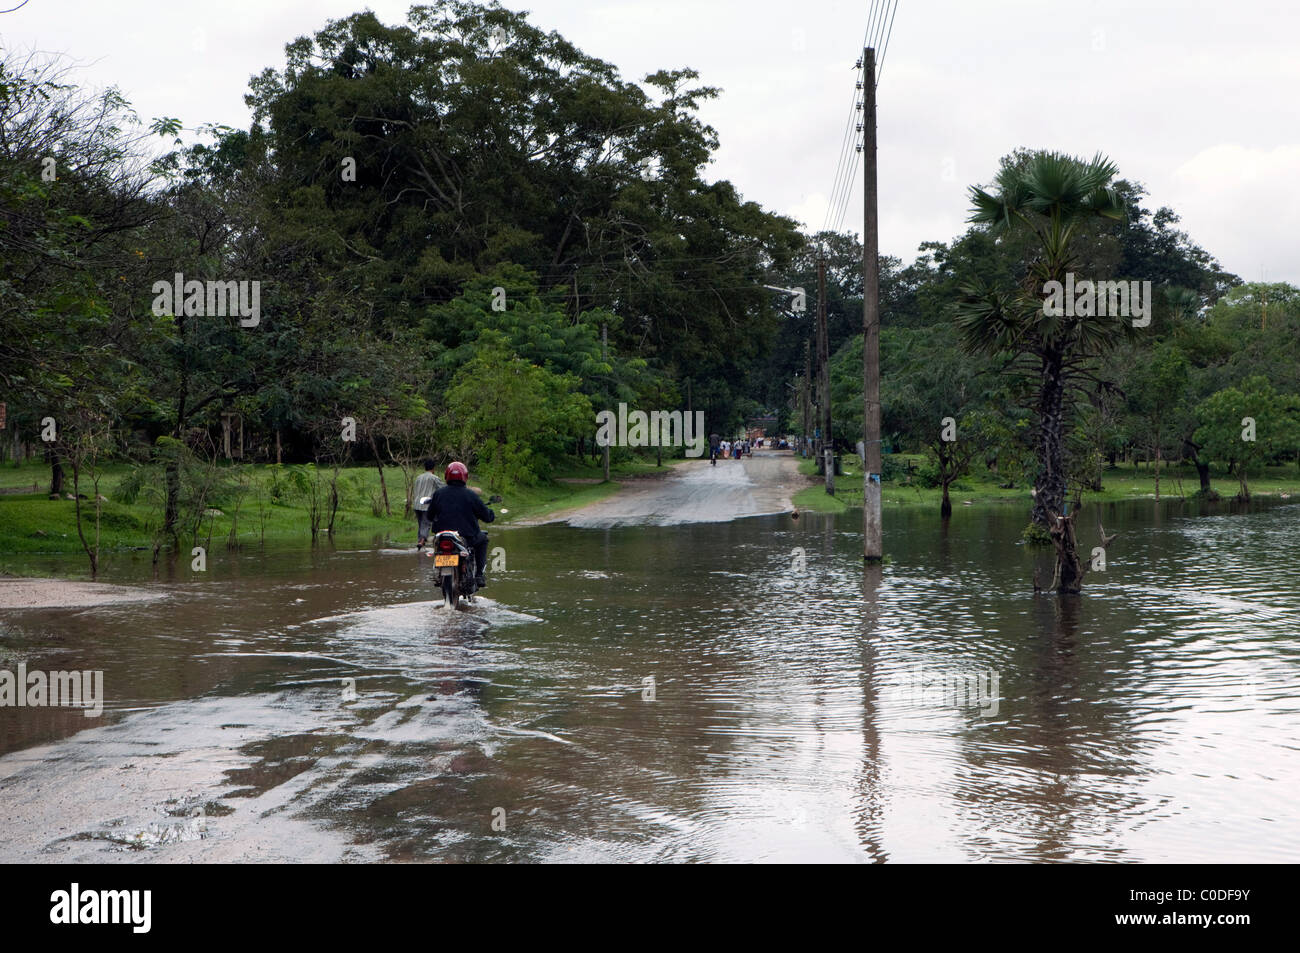 A motorbike crosses a flooded road in the ancient city of Anuradhapura in North Central Sri Lanka Stock Photo